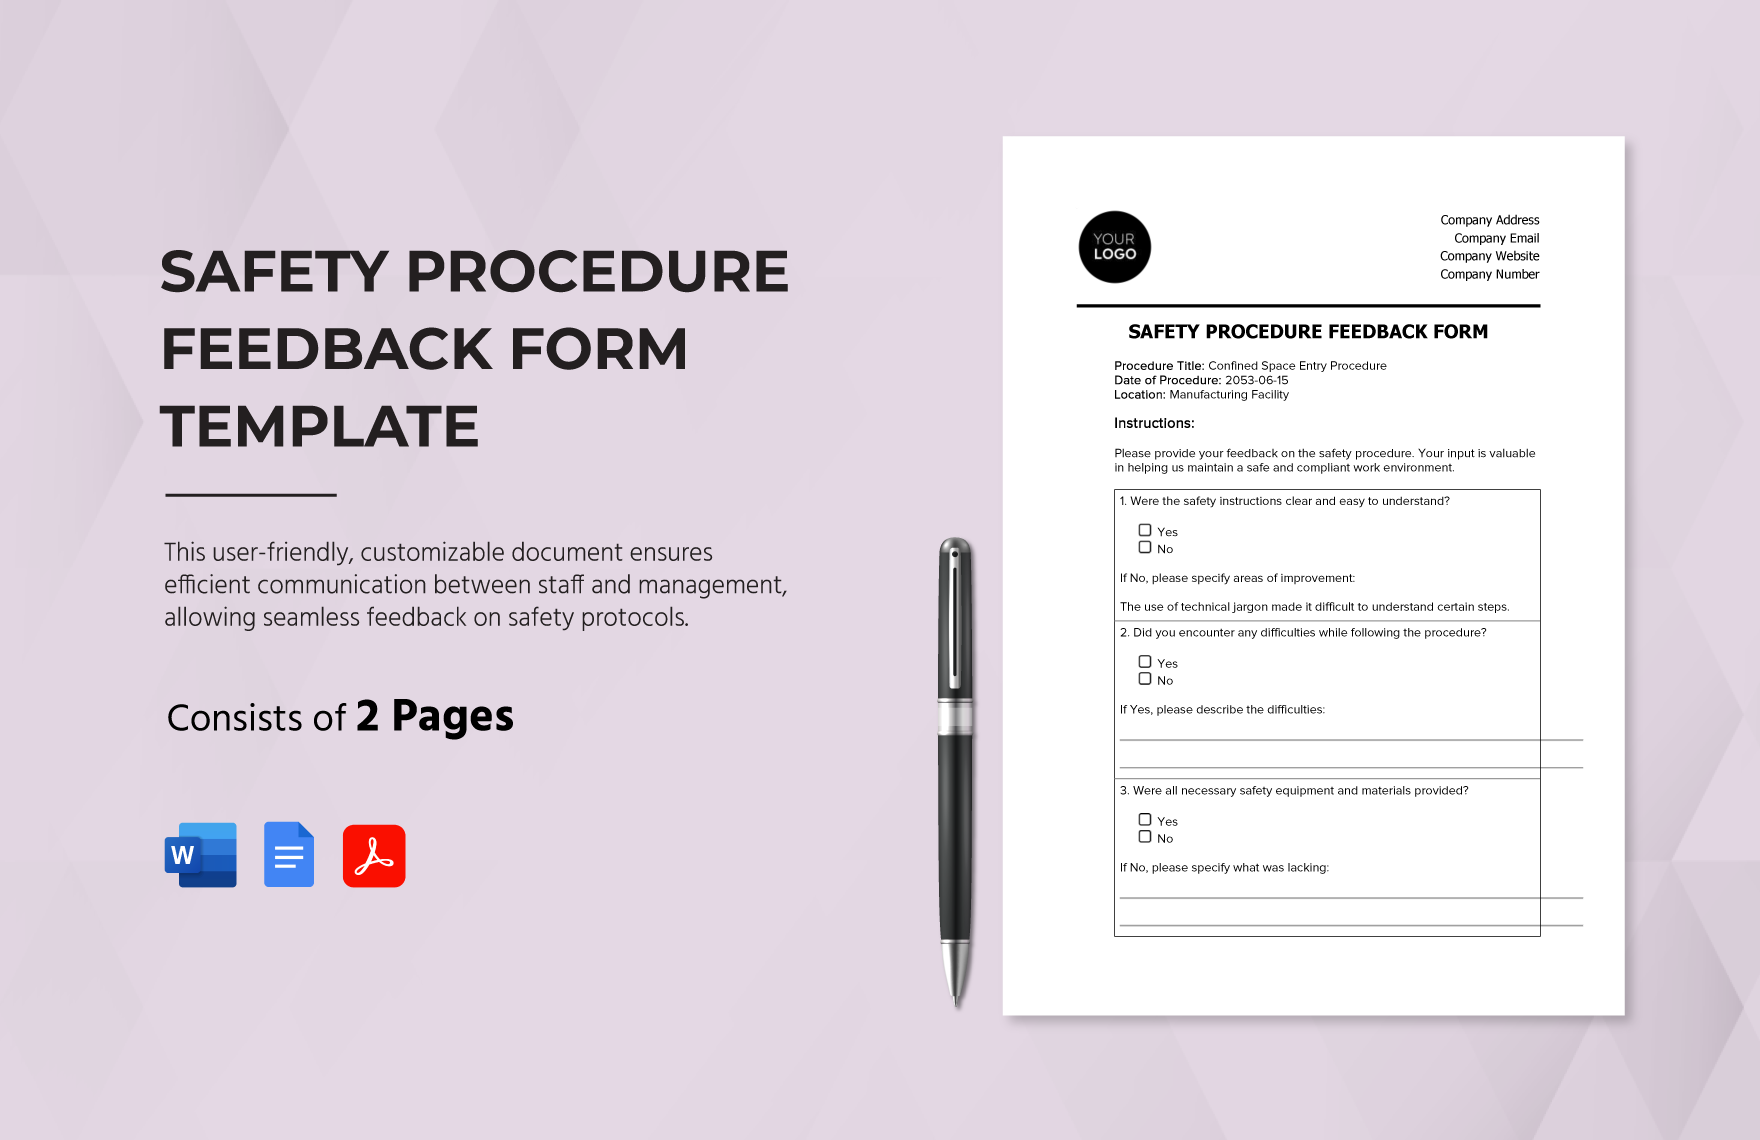 Safety Procedure Feedback Form Template